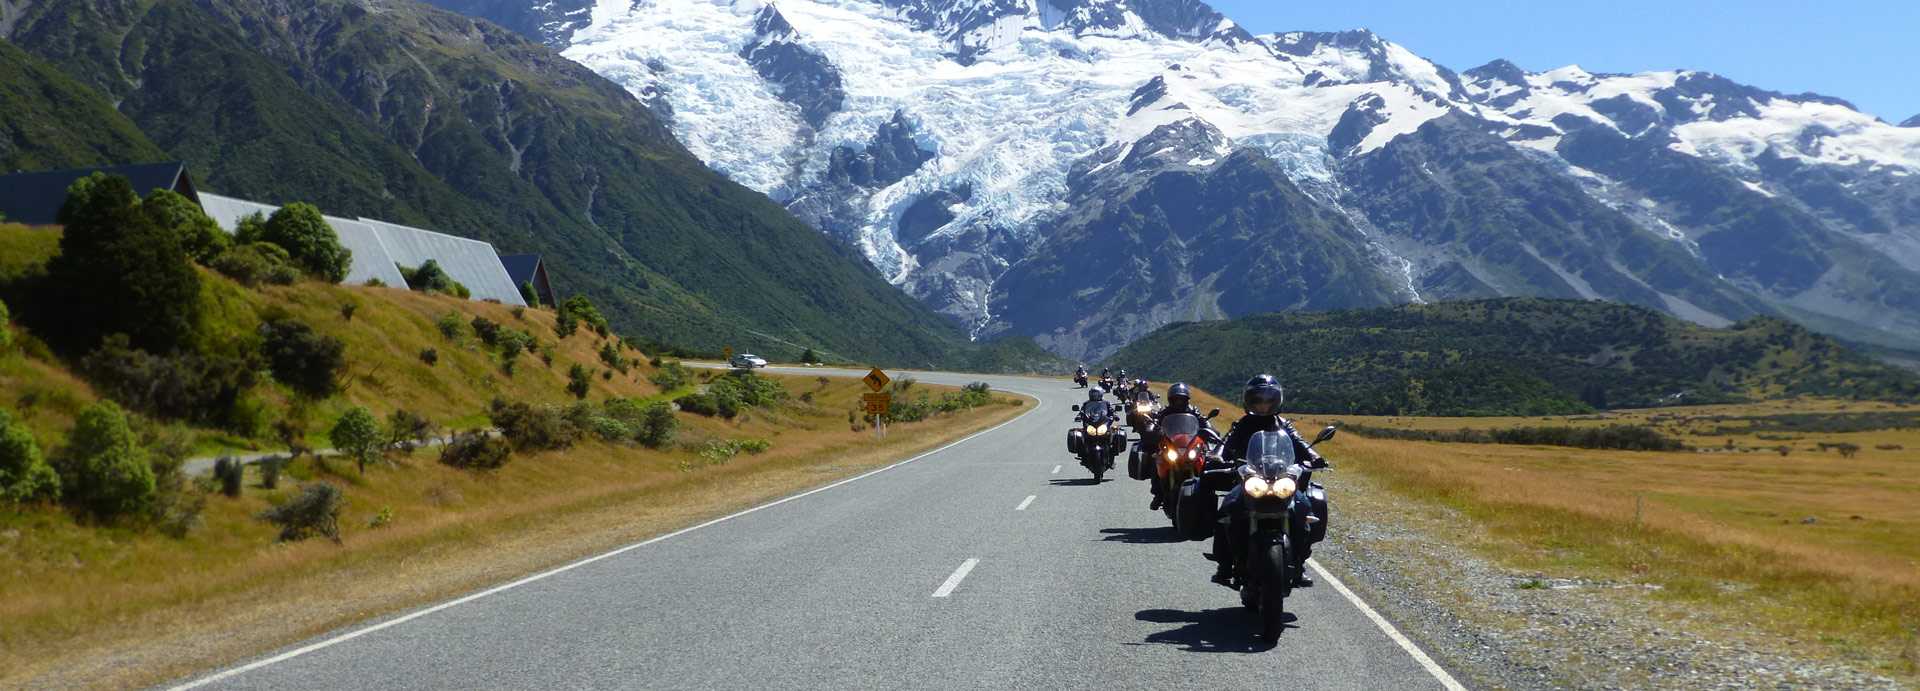 New Zealand Motorcycle Tours, Rentals and Hire NZ